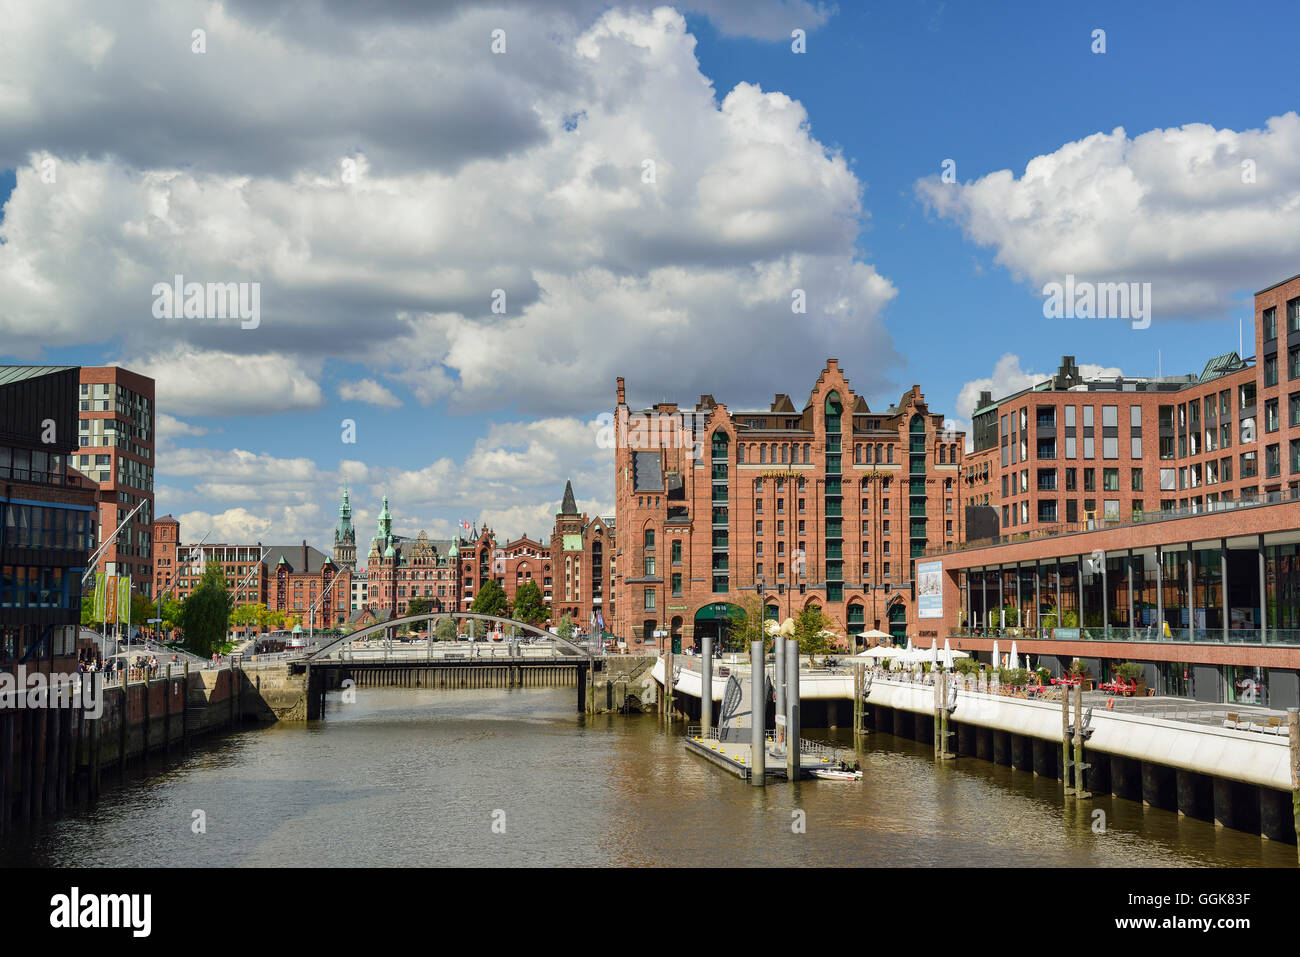 Port Magdeburger Hafen with warehouse district in the background, Hafencity, Hamburg, Germany Stock Photo